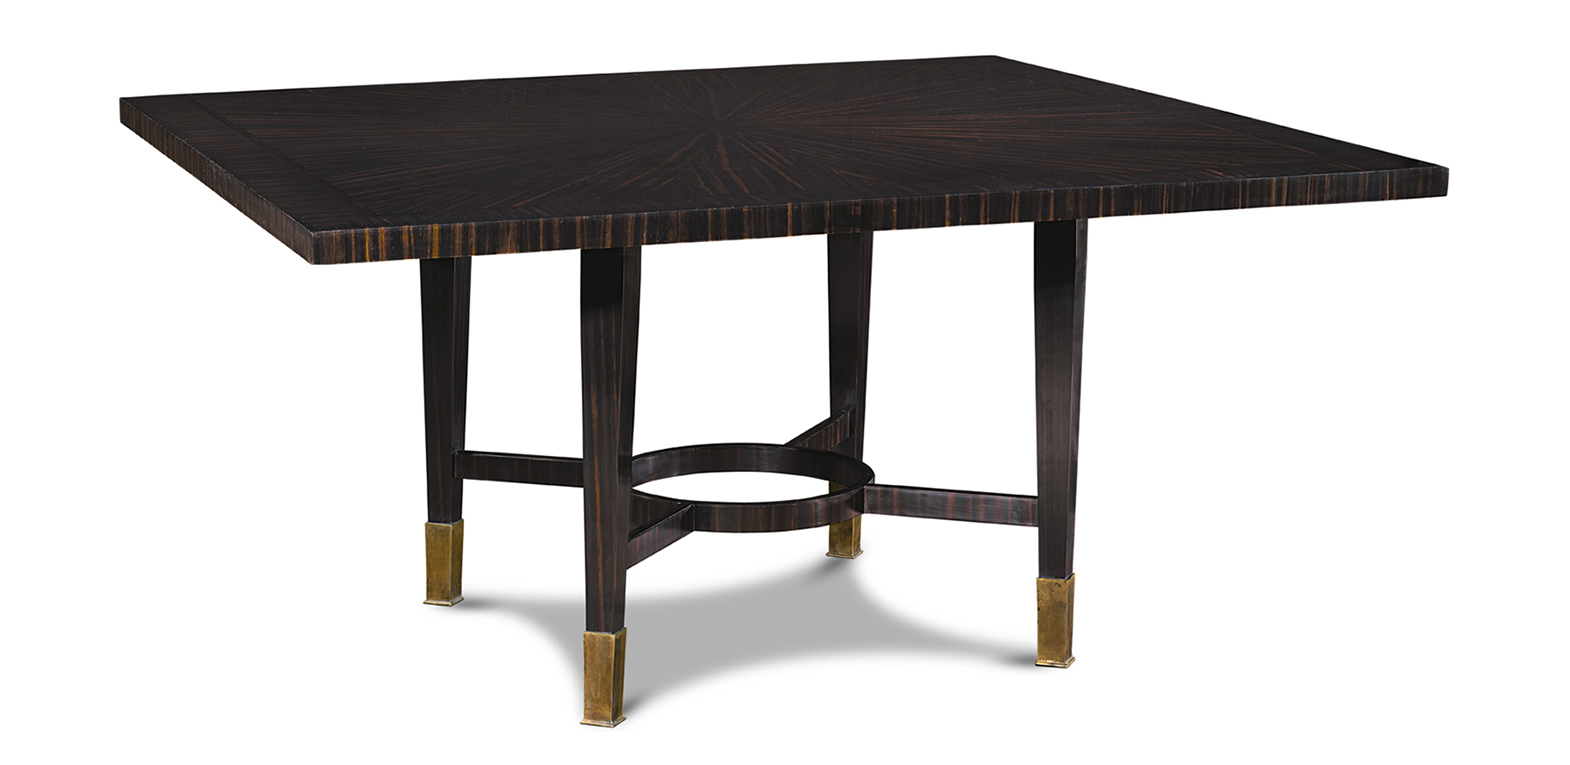 ARGUEIL SQUARE DINING TABLE 180